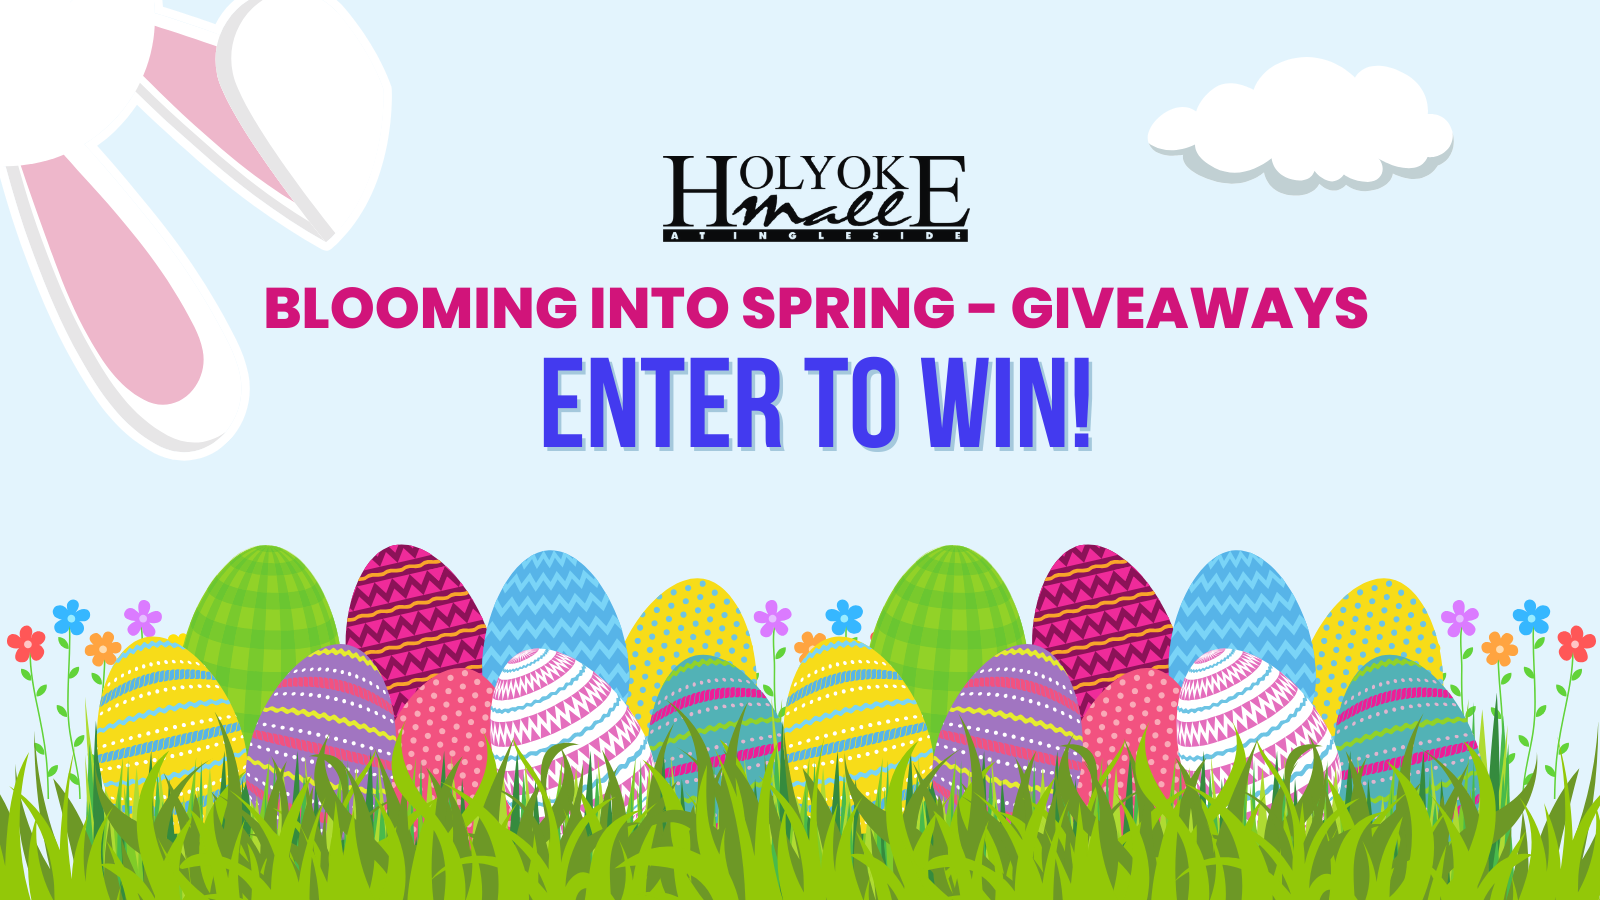 Easter Giveaways Enter To Win Sign 2048 x 733 px 1600 x 900 px